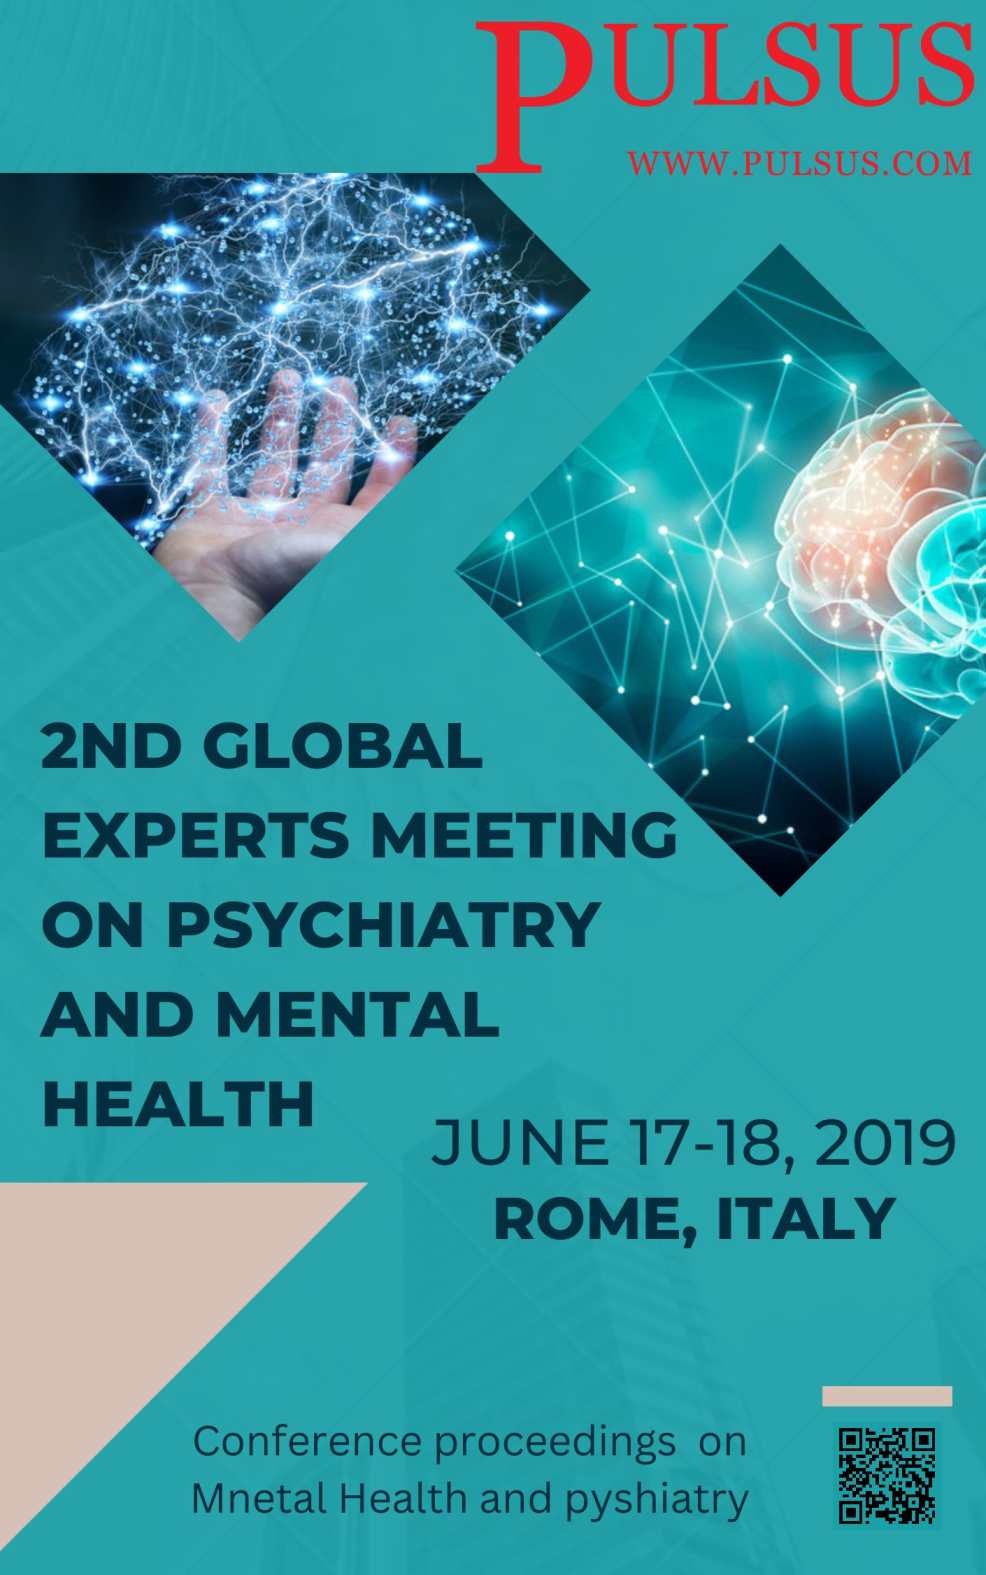 https://www.pulsus.com/conference-abstracts/psychiatry-nursing-psychiatry-2019-proceedings.html	